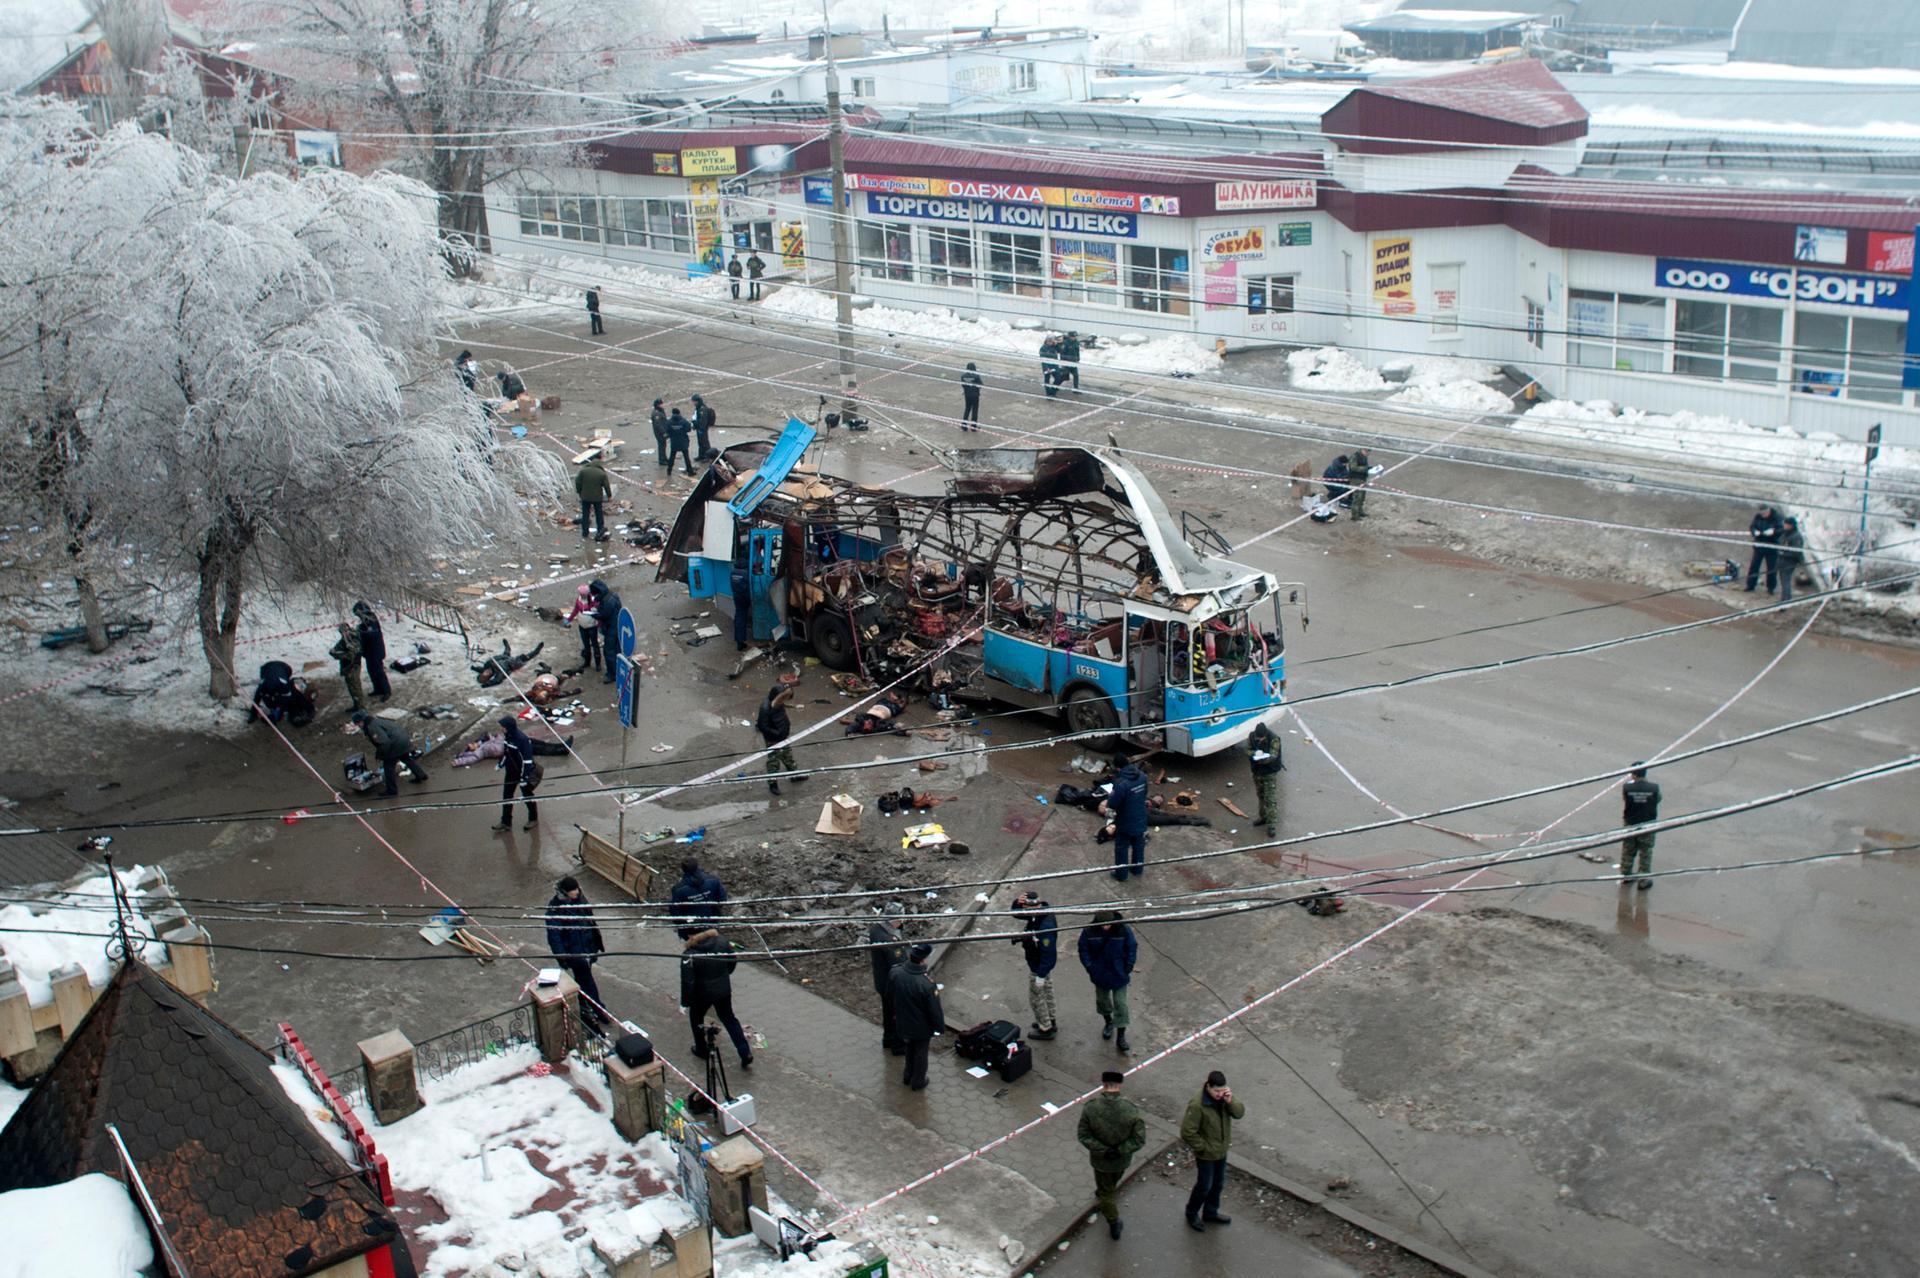 A suicide bomb blast ripped a trolleybus apart in Volgograd on Monday, in the second deadly attack in the southern city in two days.